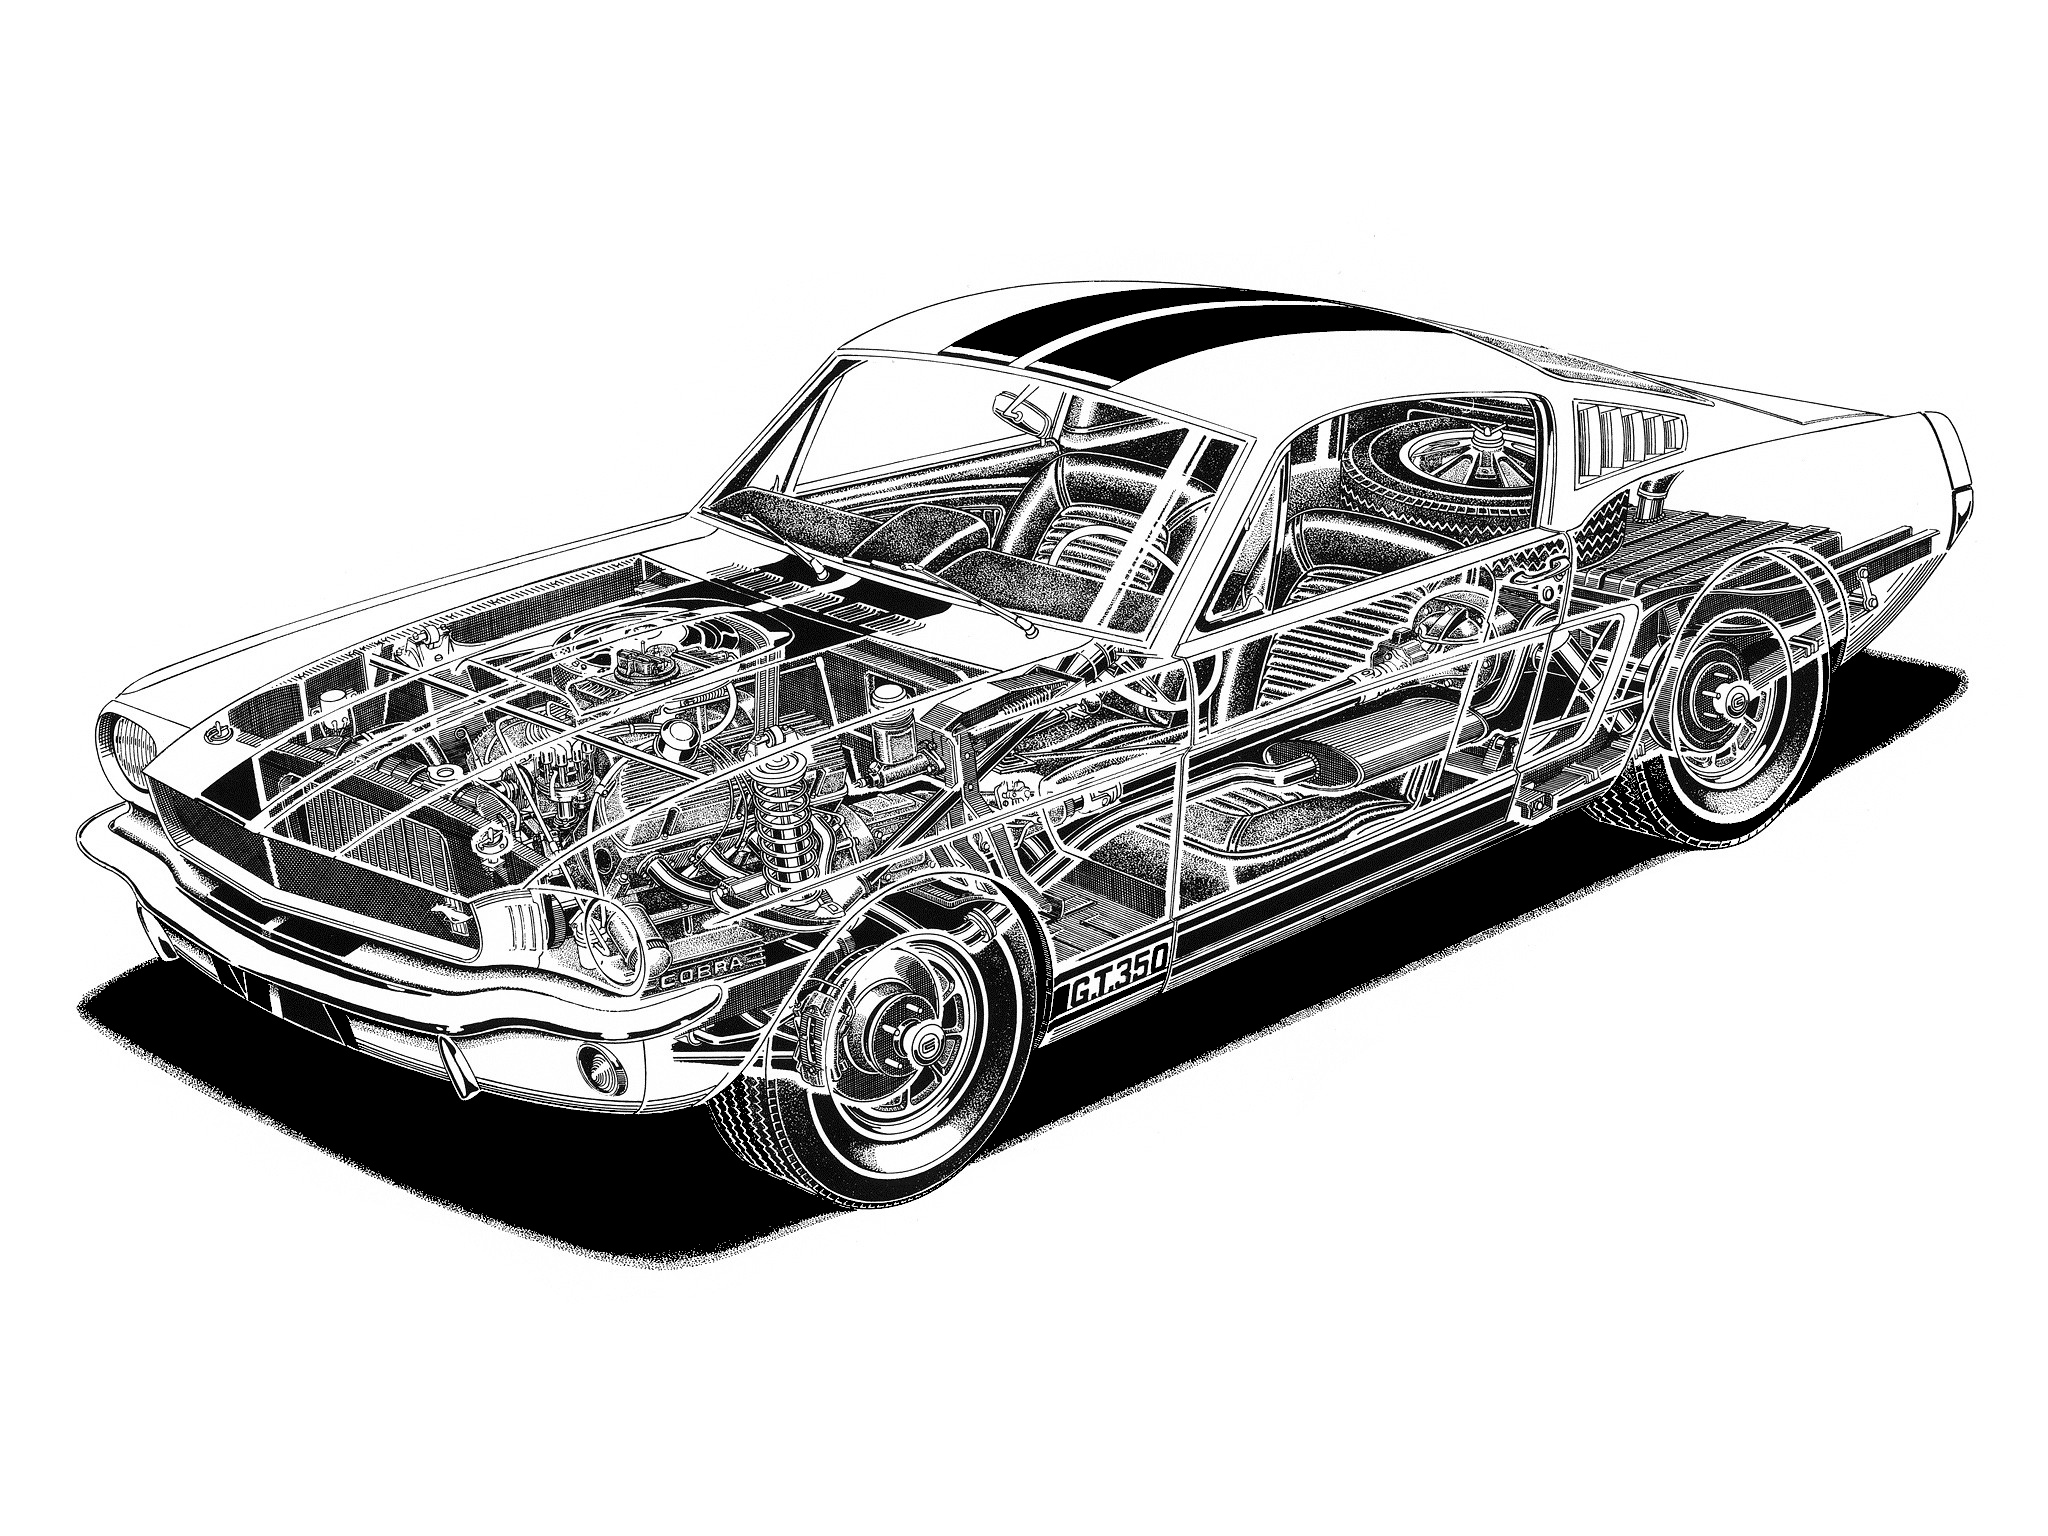 1965, Shelby, Gt350, Ford, Mustang, Classic, Muscle, Interior, Engine, Engines Wallpaper